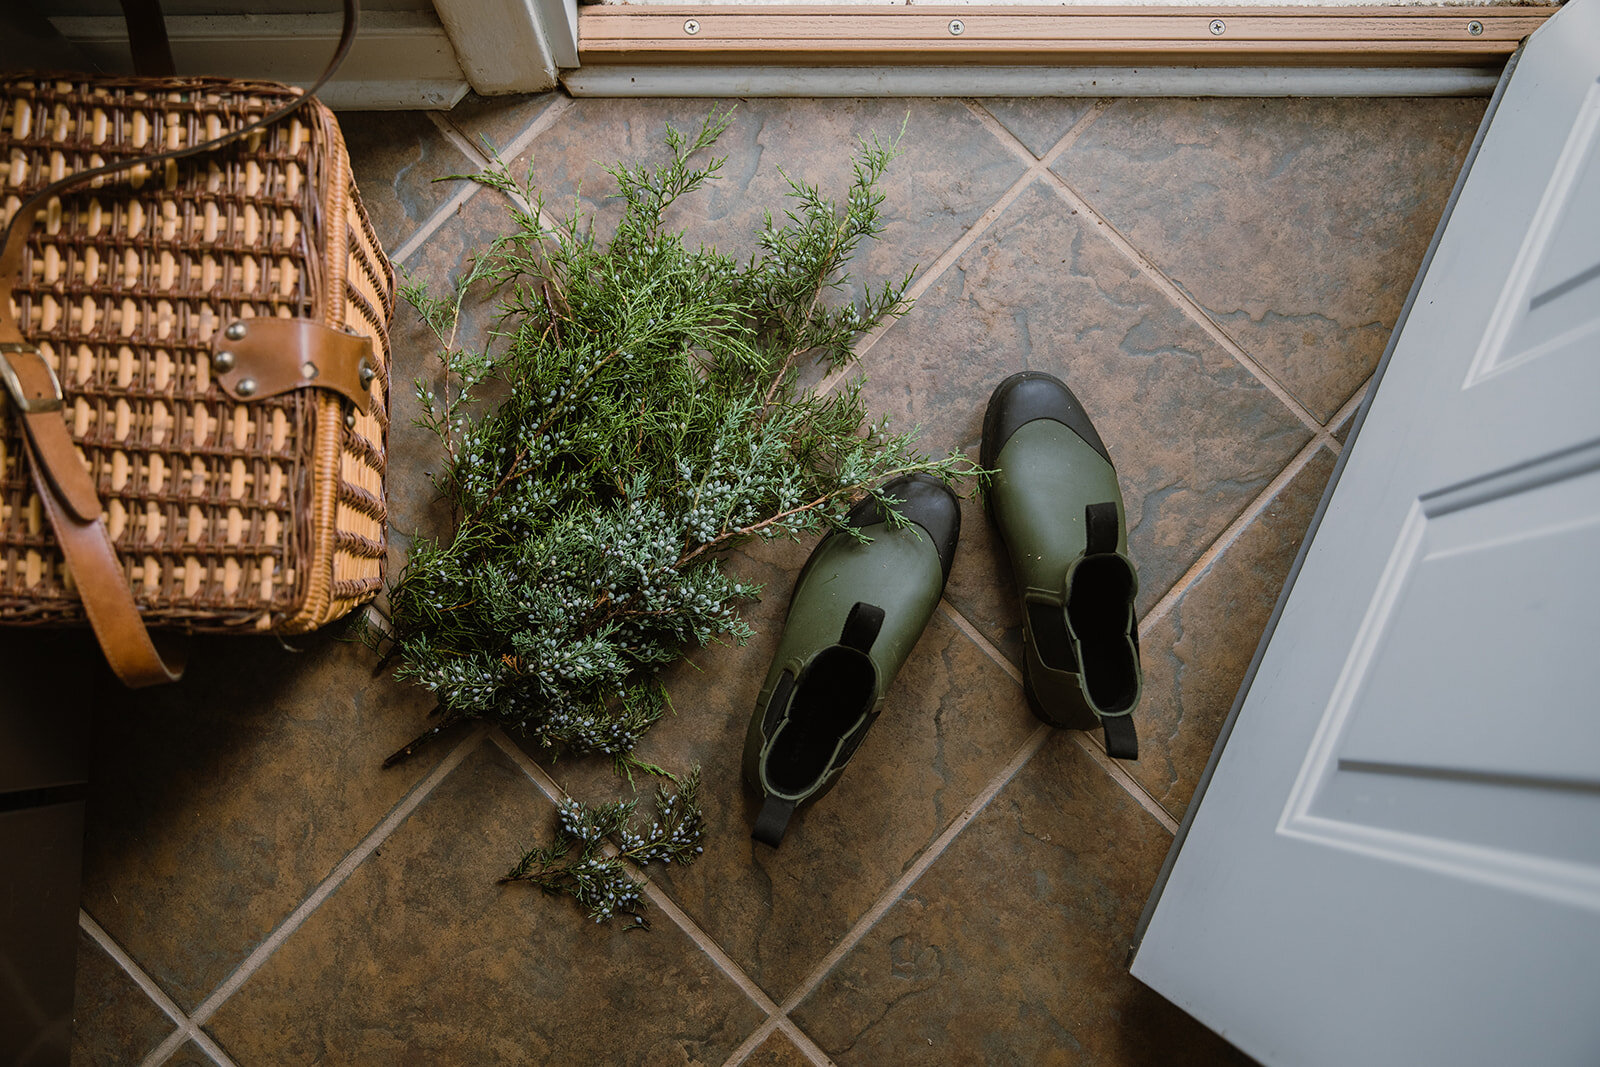  Rainboots by the door with fresh picked juniper | Be Mindful Skincare | Sarah Mattozzi Photography 